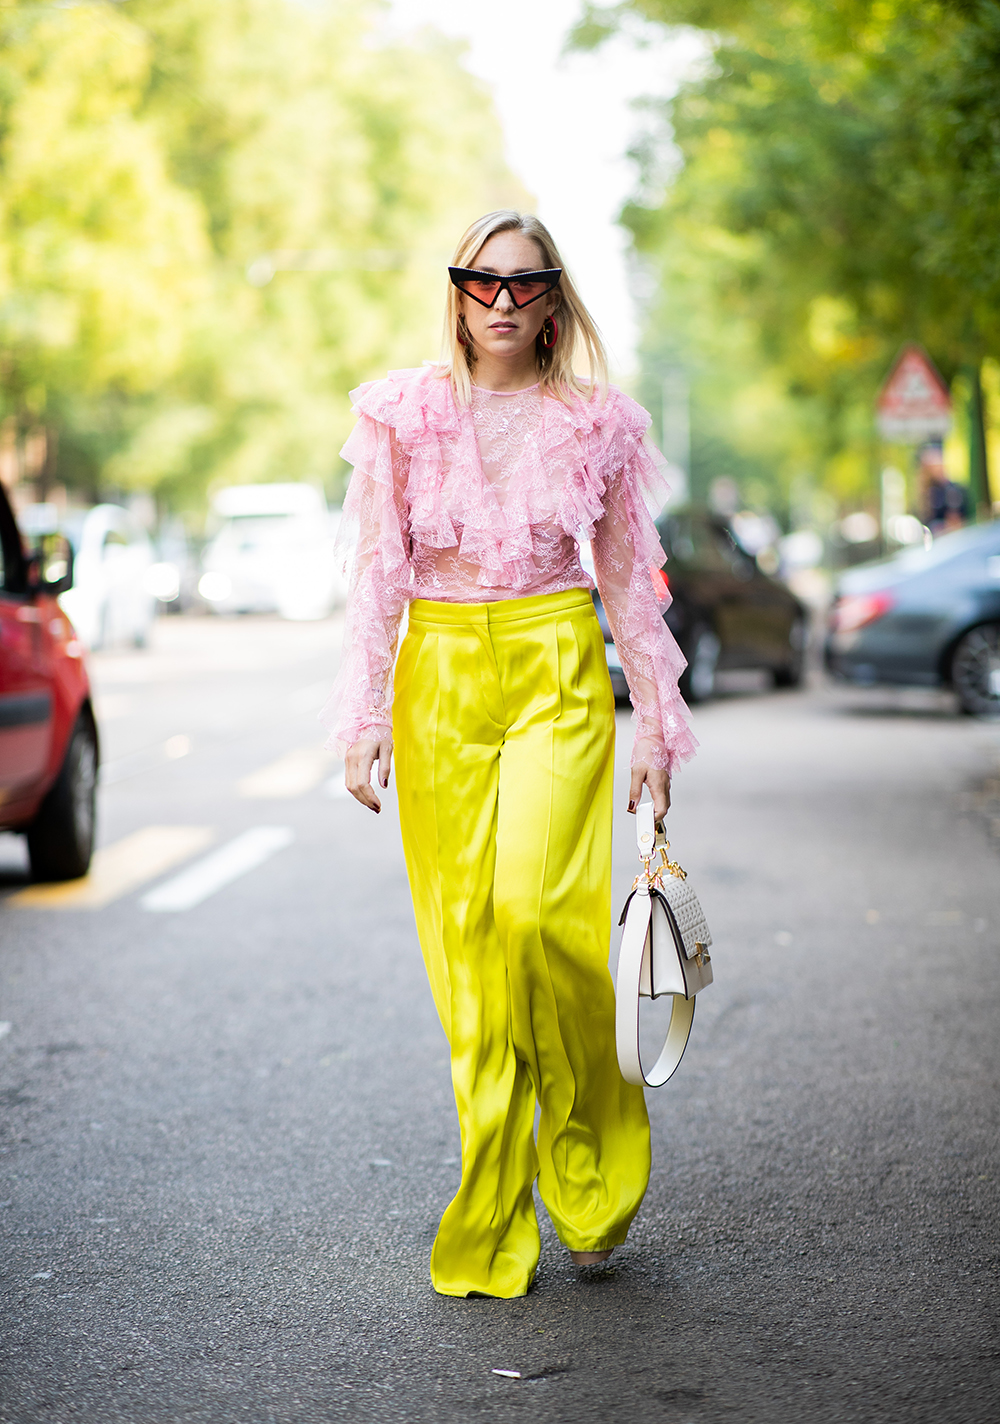 MILAN, ITALY - SEPTEMBER 20: Sonia Lyson wearing yellow pants Rochas, pink top Philosophy, Gucci bag, sunglasses Fendi is seen outside Fendi during Milan Fashion Week Spring/Summer 2019 on September 20, 2018 in Milan, Italy. (Photo by Christian Vierig/Getty Images)